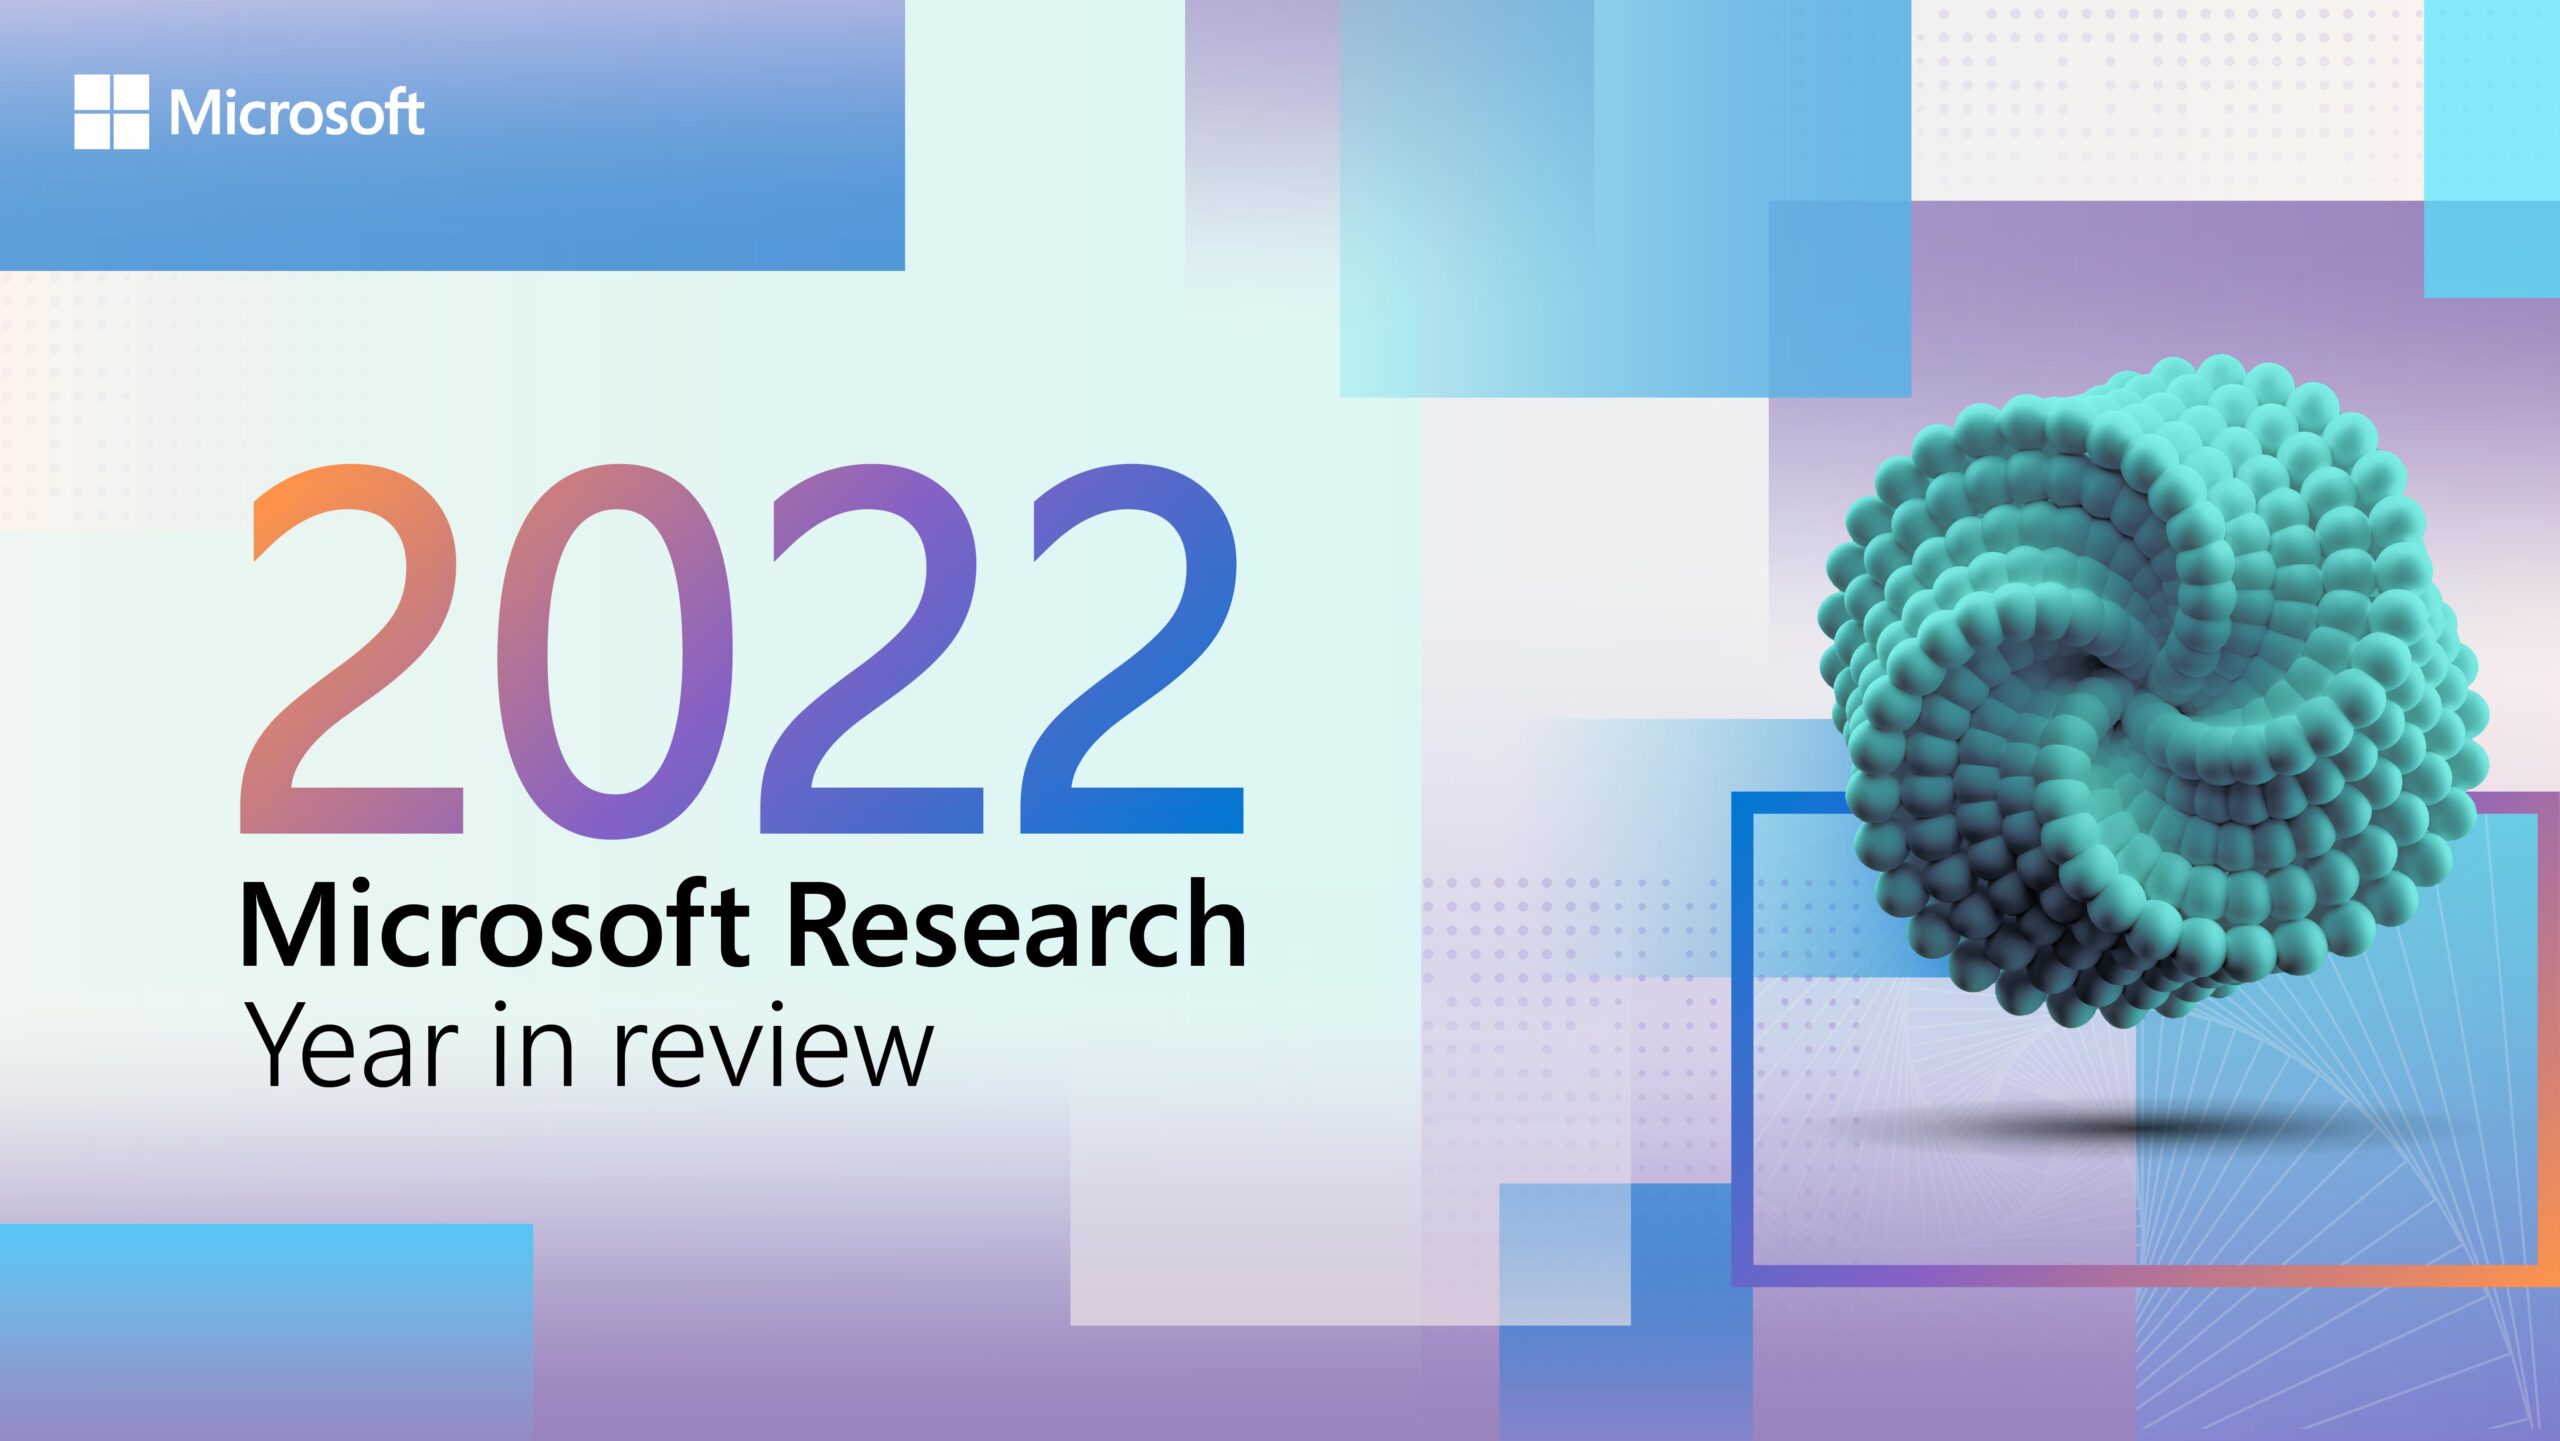 2022 Microsoft Research - Year in review graphic